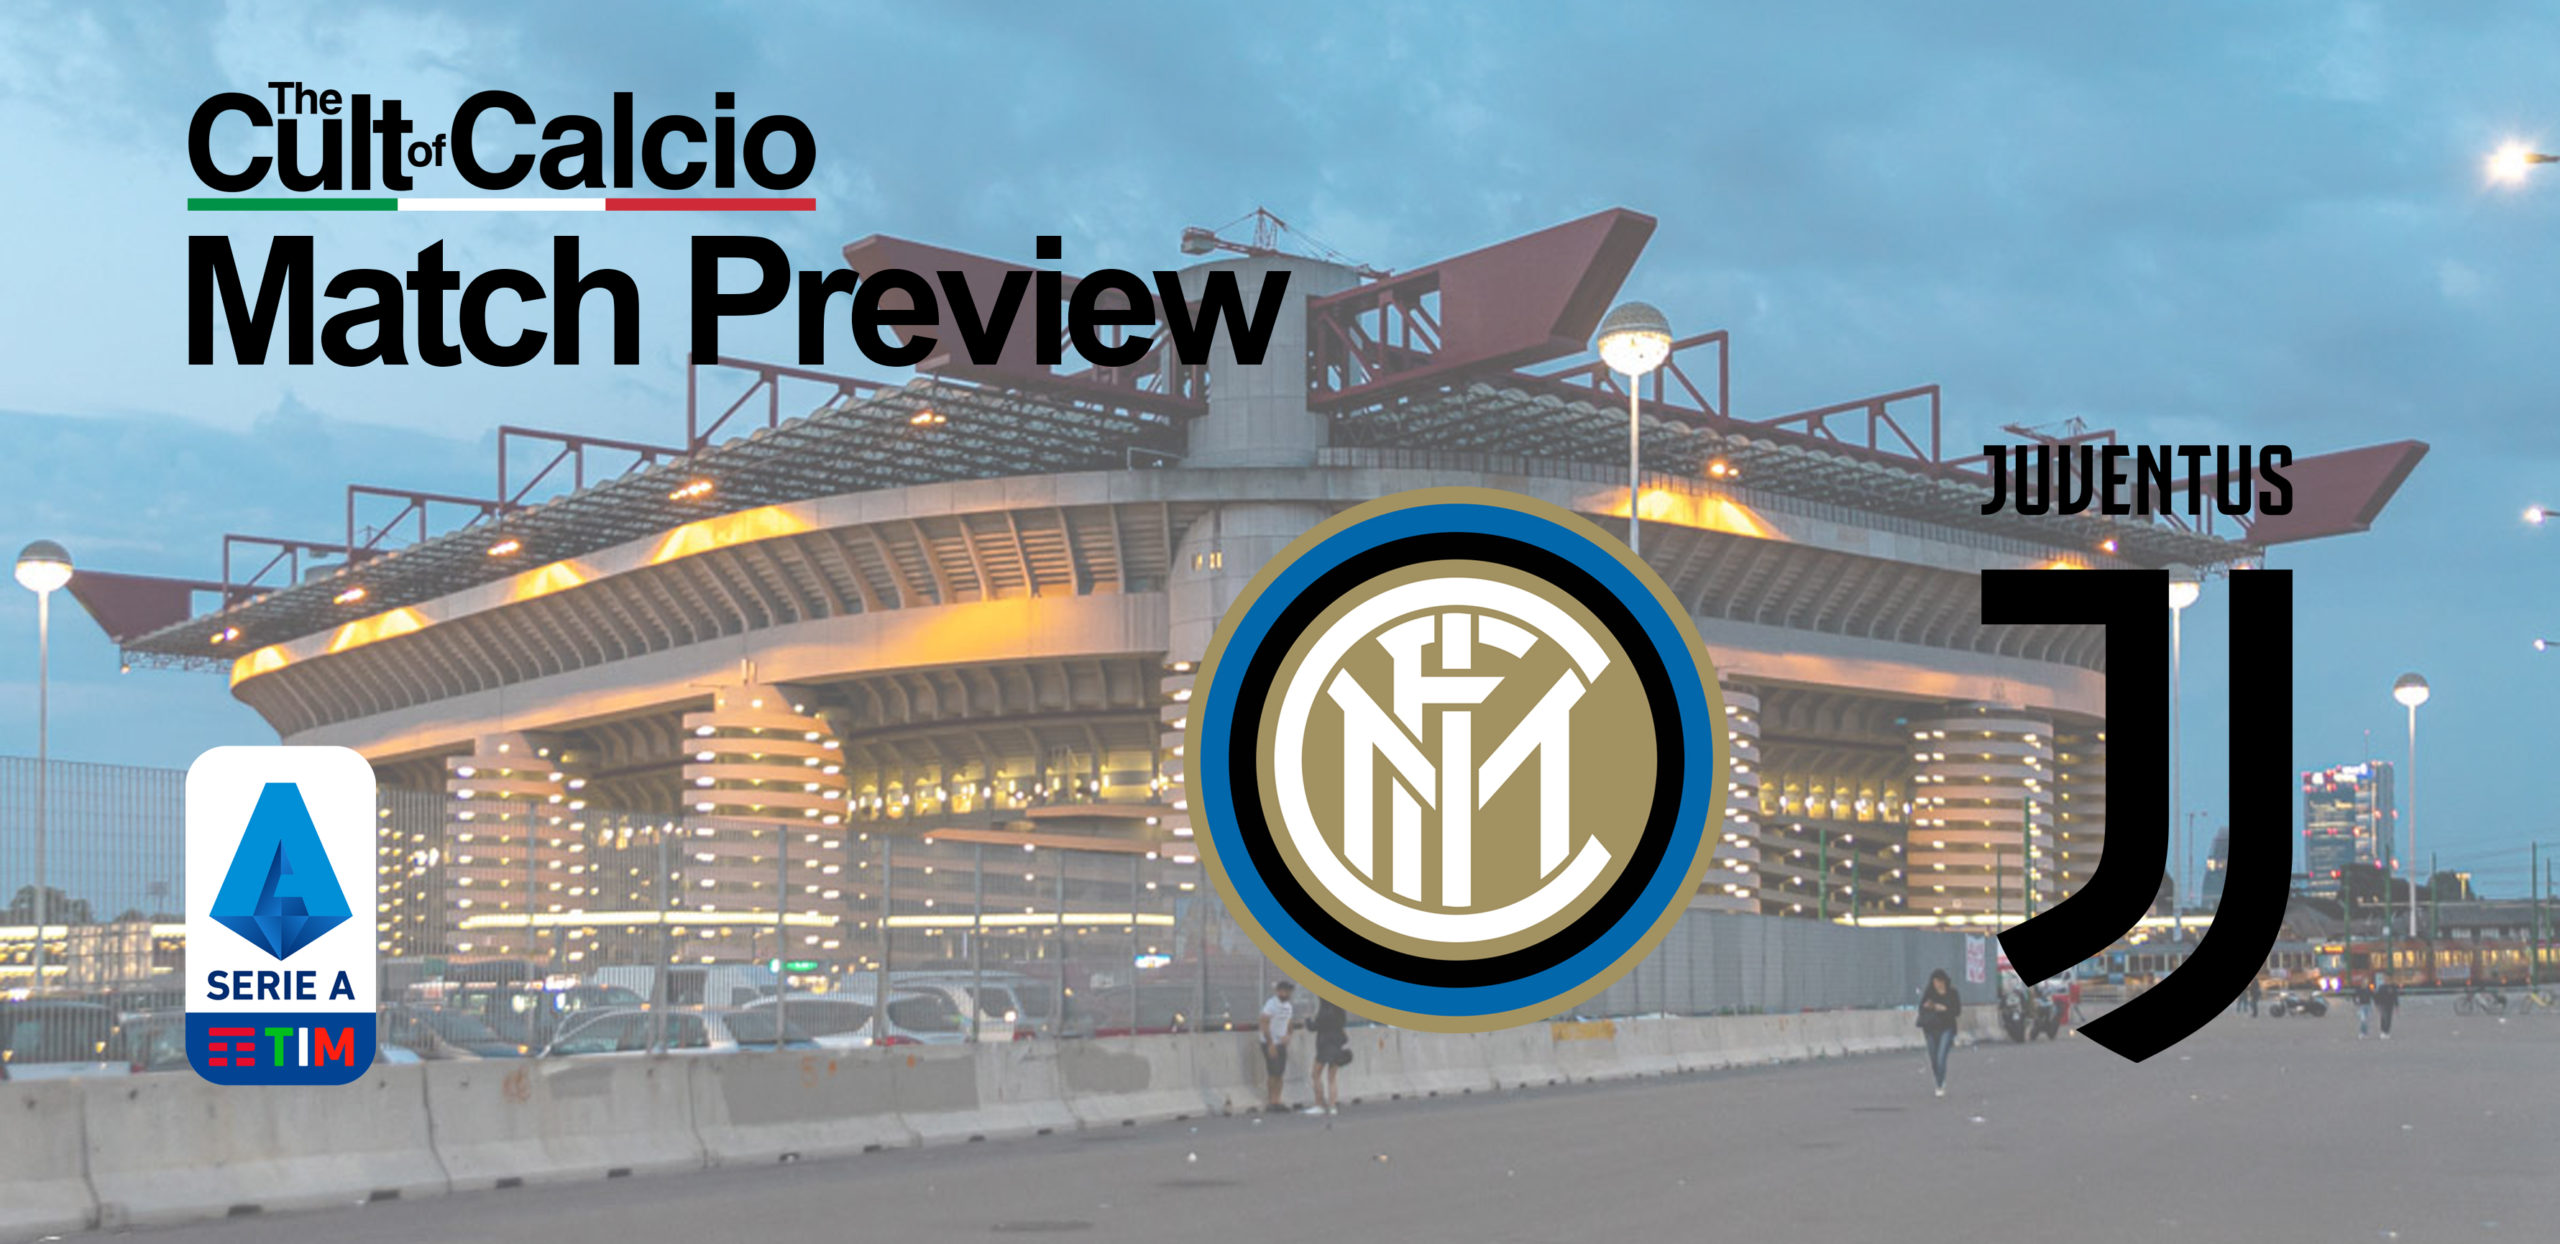 In Round 18 of Serie A, Inter and Juventus go head-to-head in what is regarded as one of the biggest rivalries in European football – the Derby d’Italia